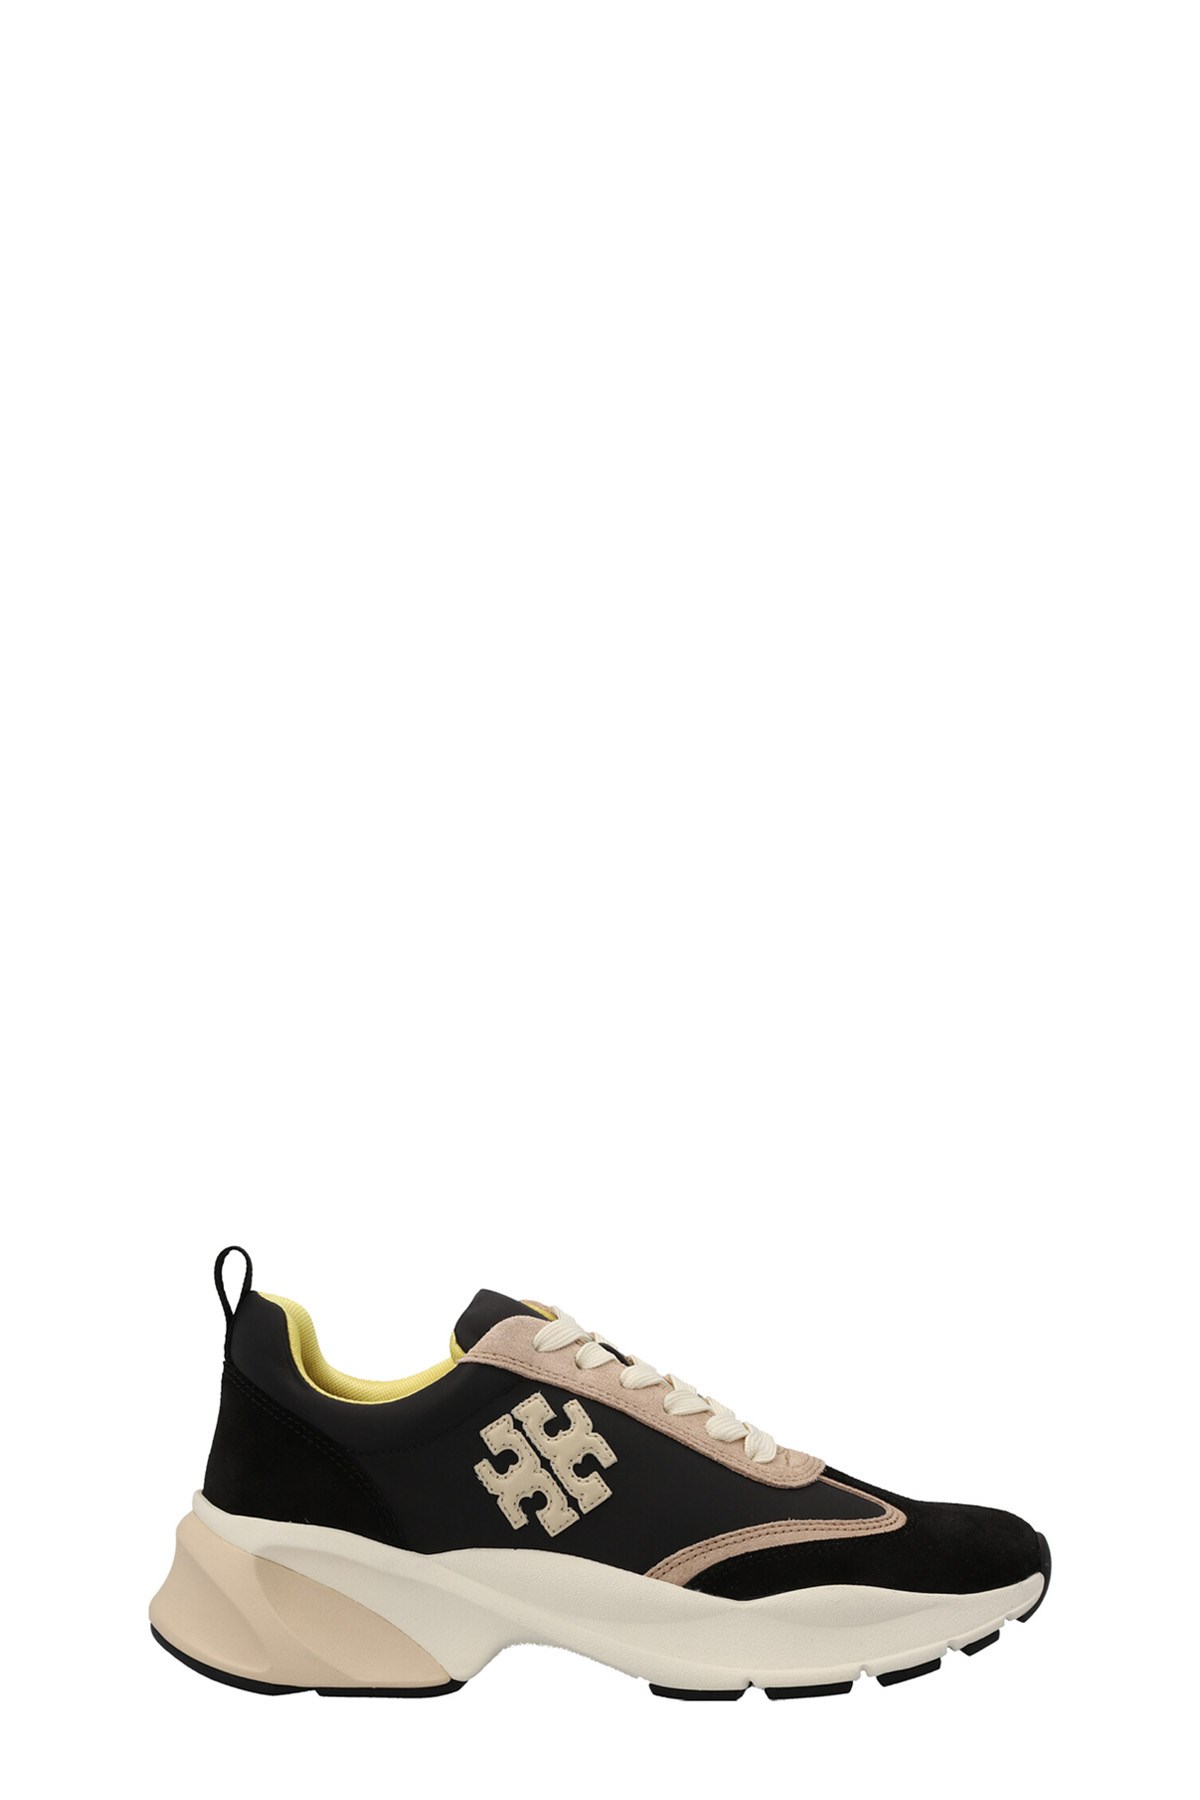 TORY BURCH Sneakers 'Good Luck'